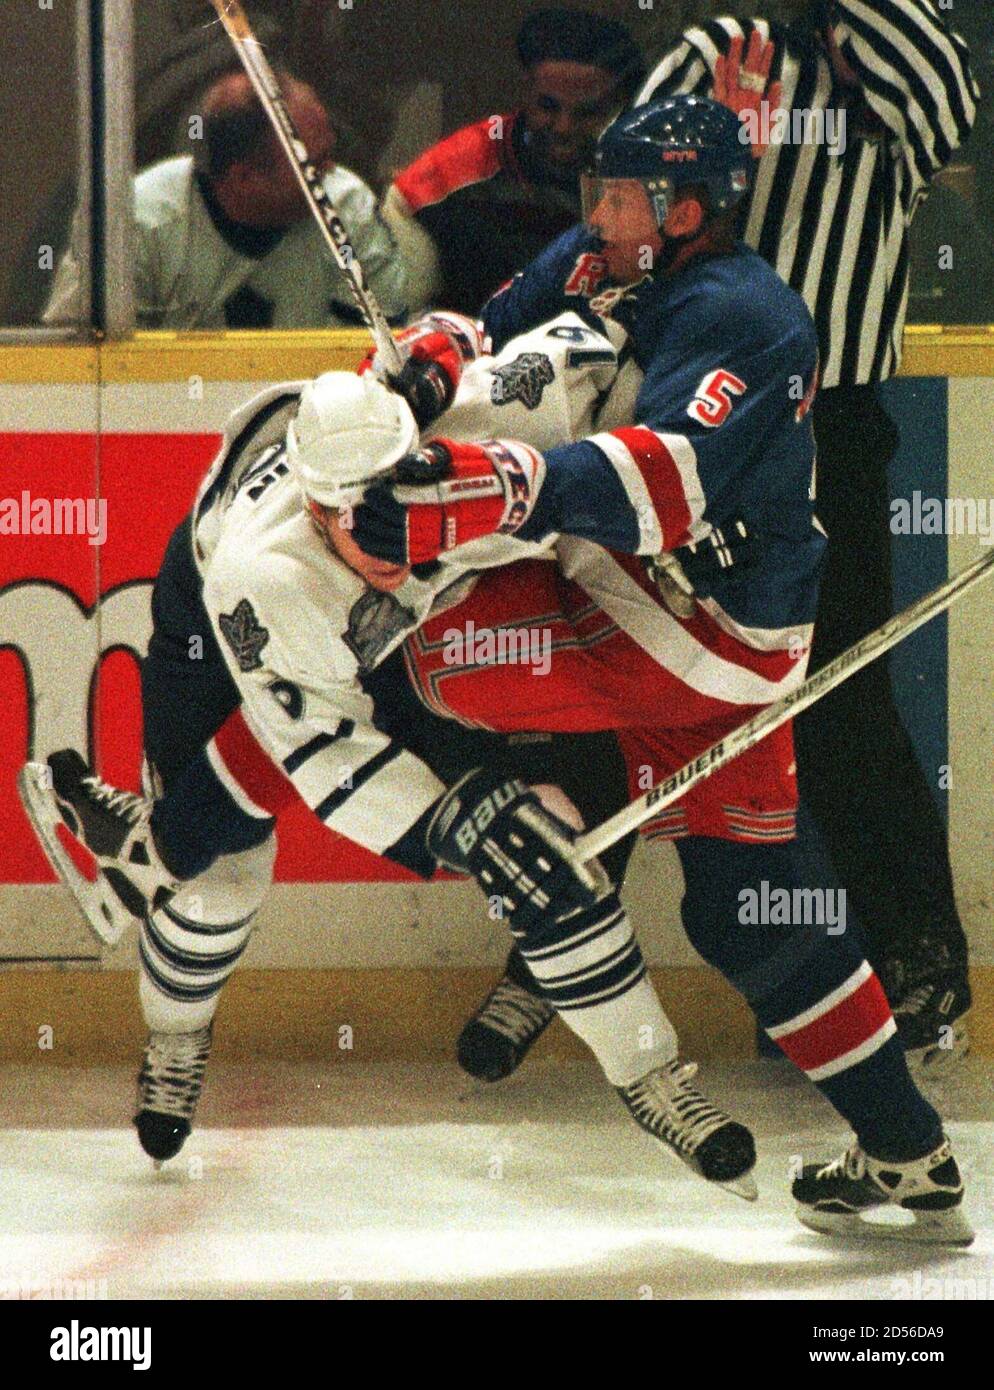 Toronto Maple Leafs' forward Fredrik Modin (L) gets roughed up at the blue line by New York Rangers' defenseman Ulf Samuelsson during first period NHL action in Toronto, December 19.  ANW/RC Stock Photo